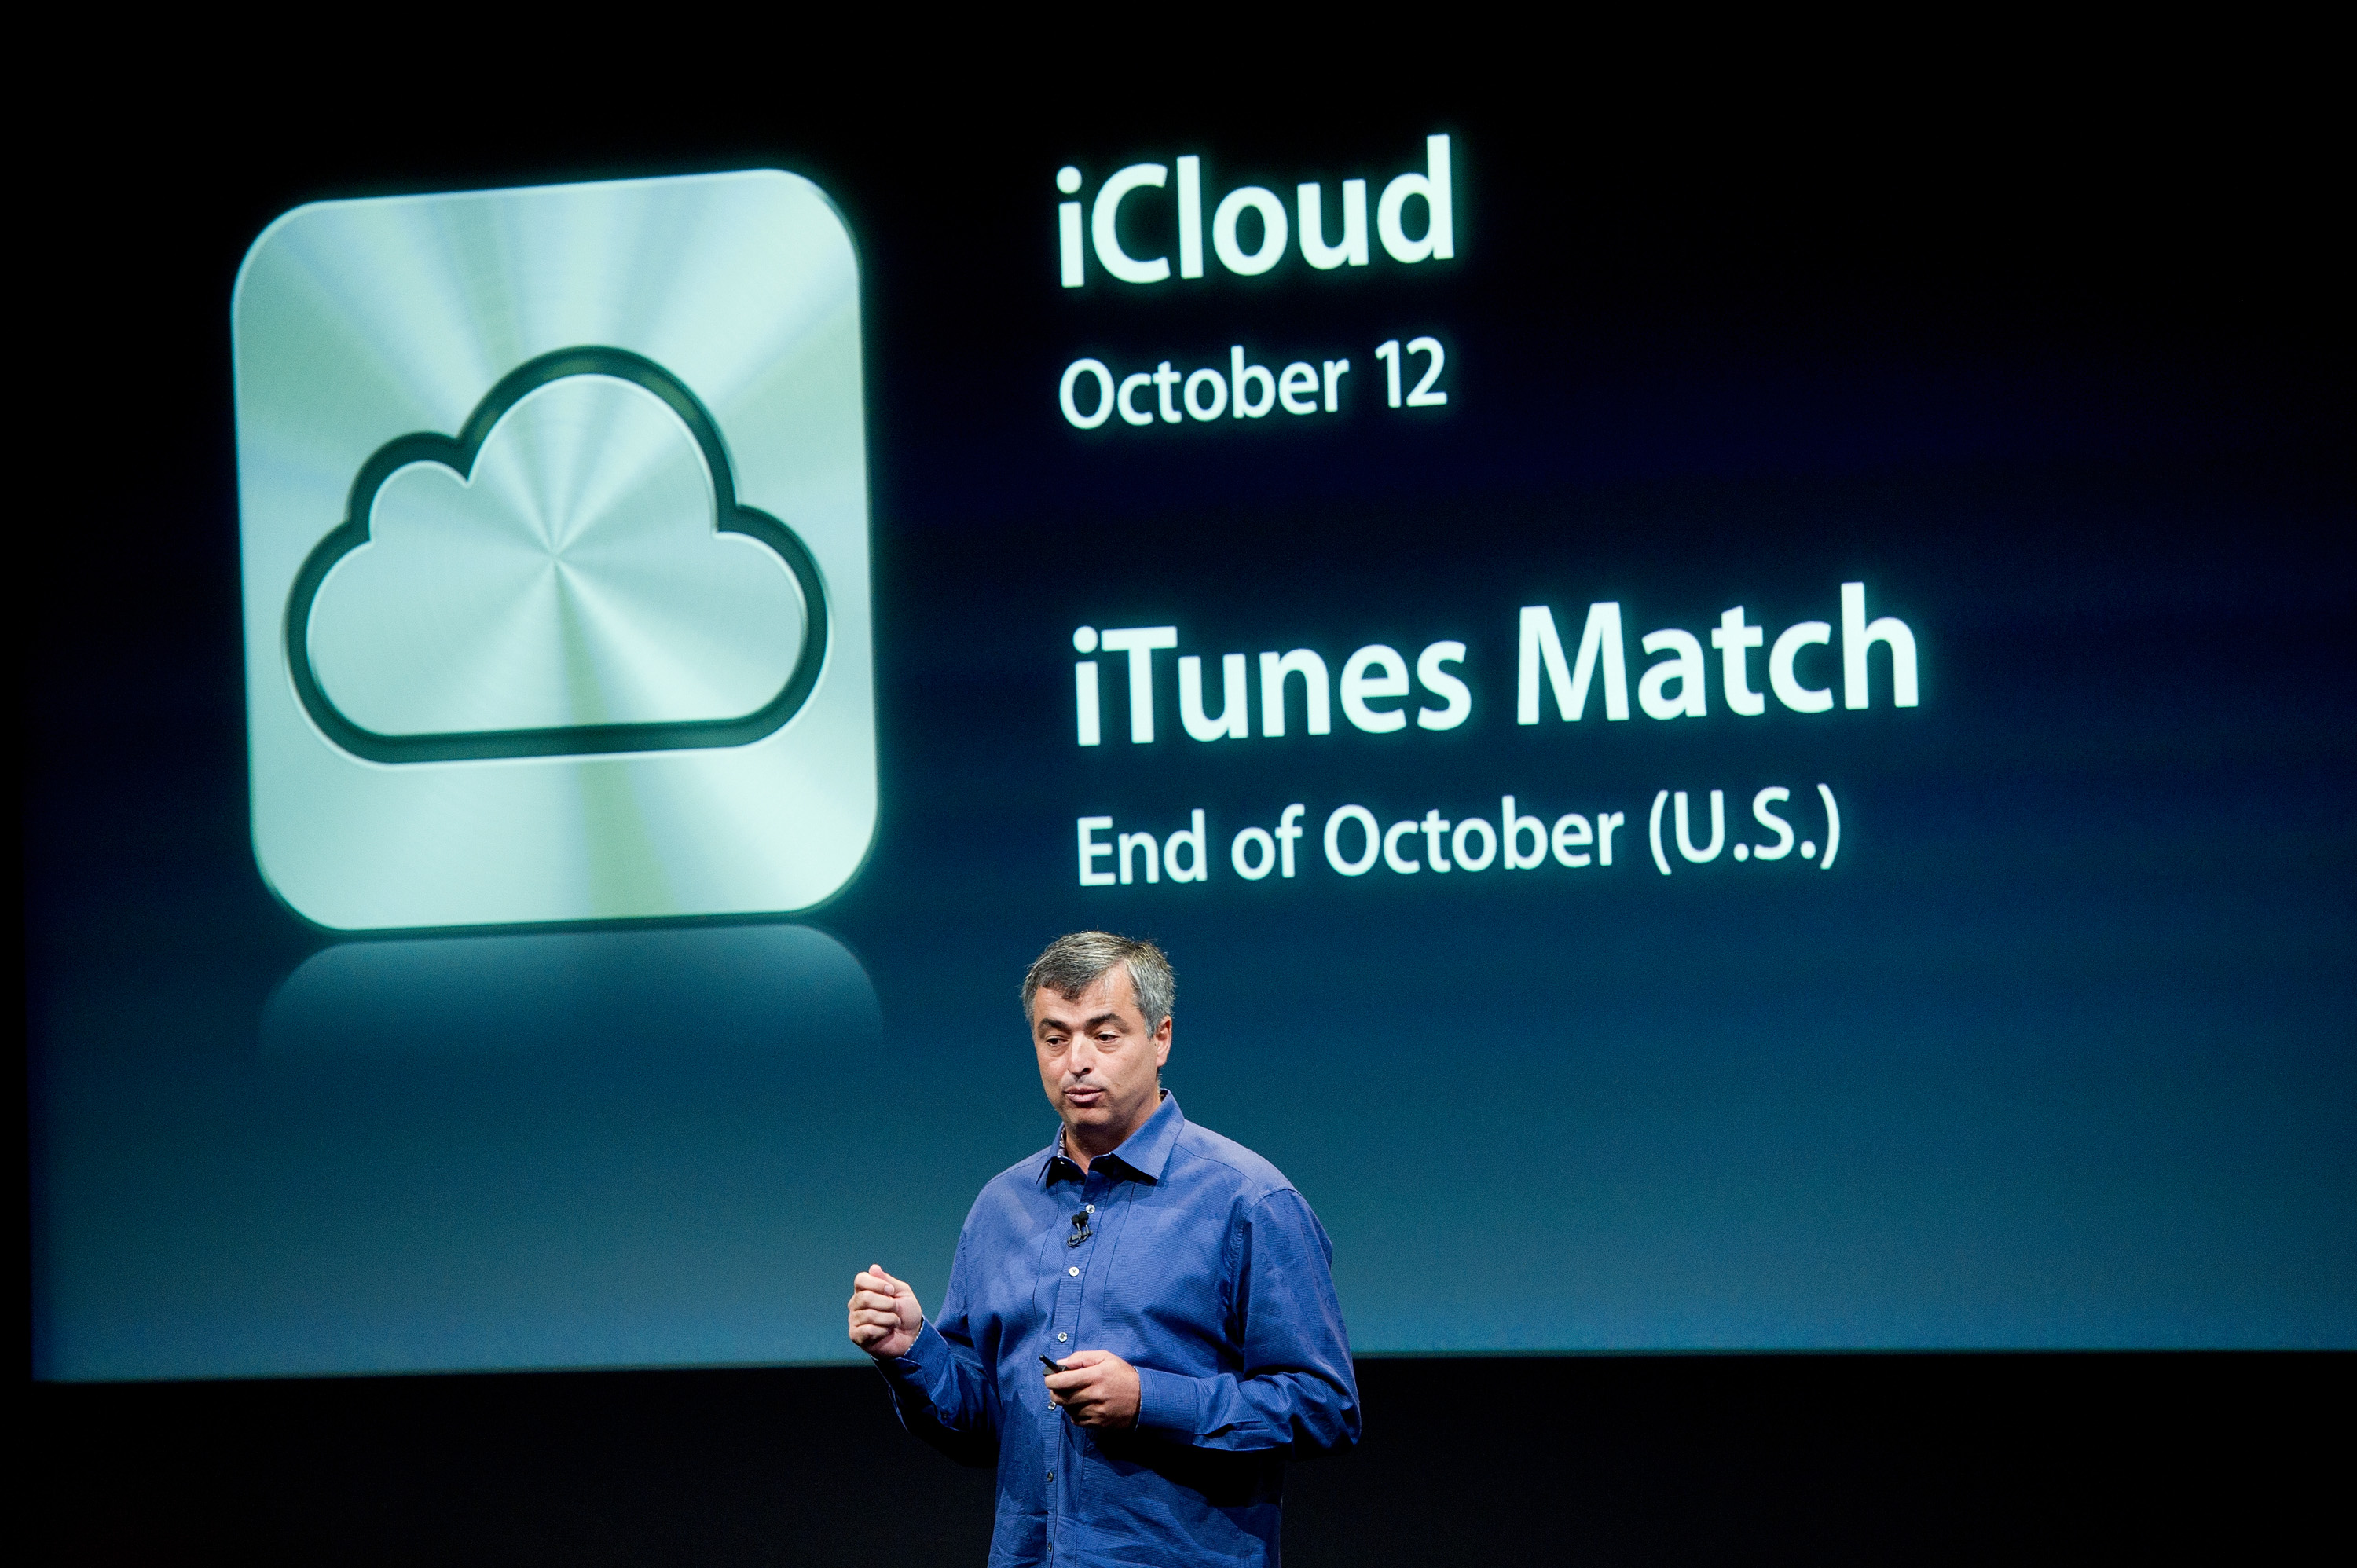 Eddie Cue, senior vice president of Internet Software and Services at Apple Inc., speaks about new features of the iCloud service during an event at the company's headquarters in Cupertino, California, U.S., on Tuesday, Oct. 4, 2011. (Bloomberg—Bloomberg via Getty Images)